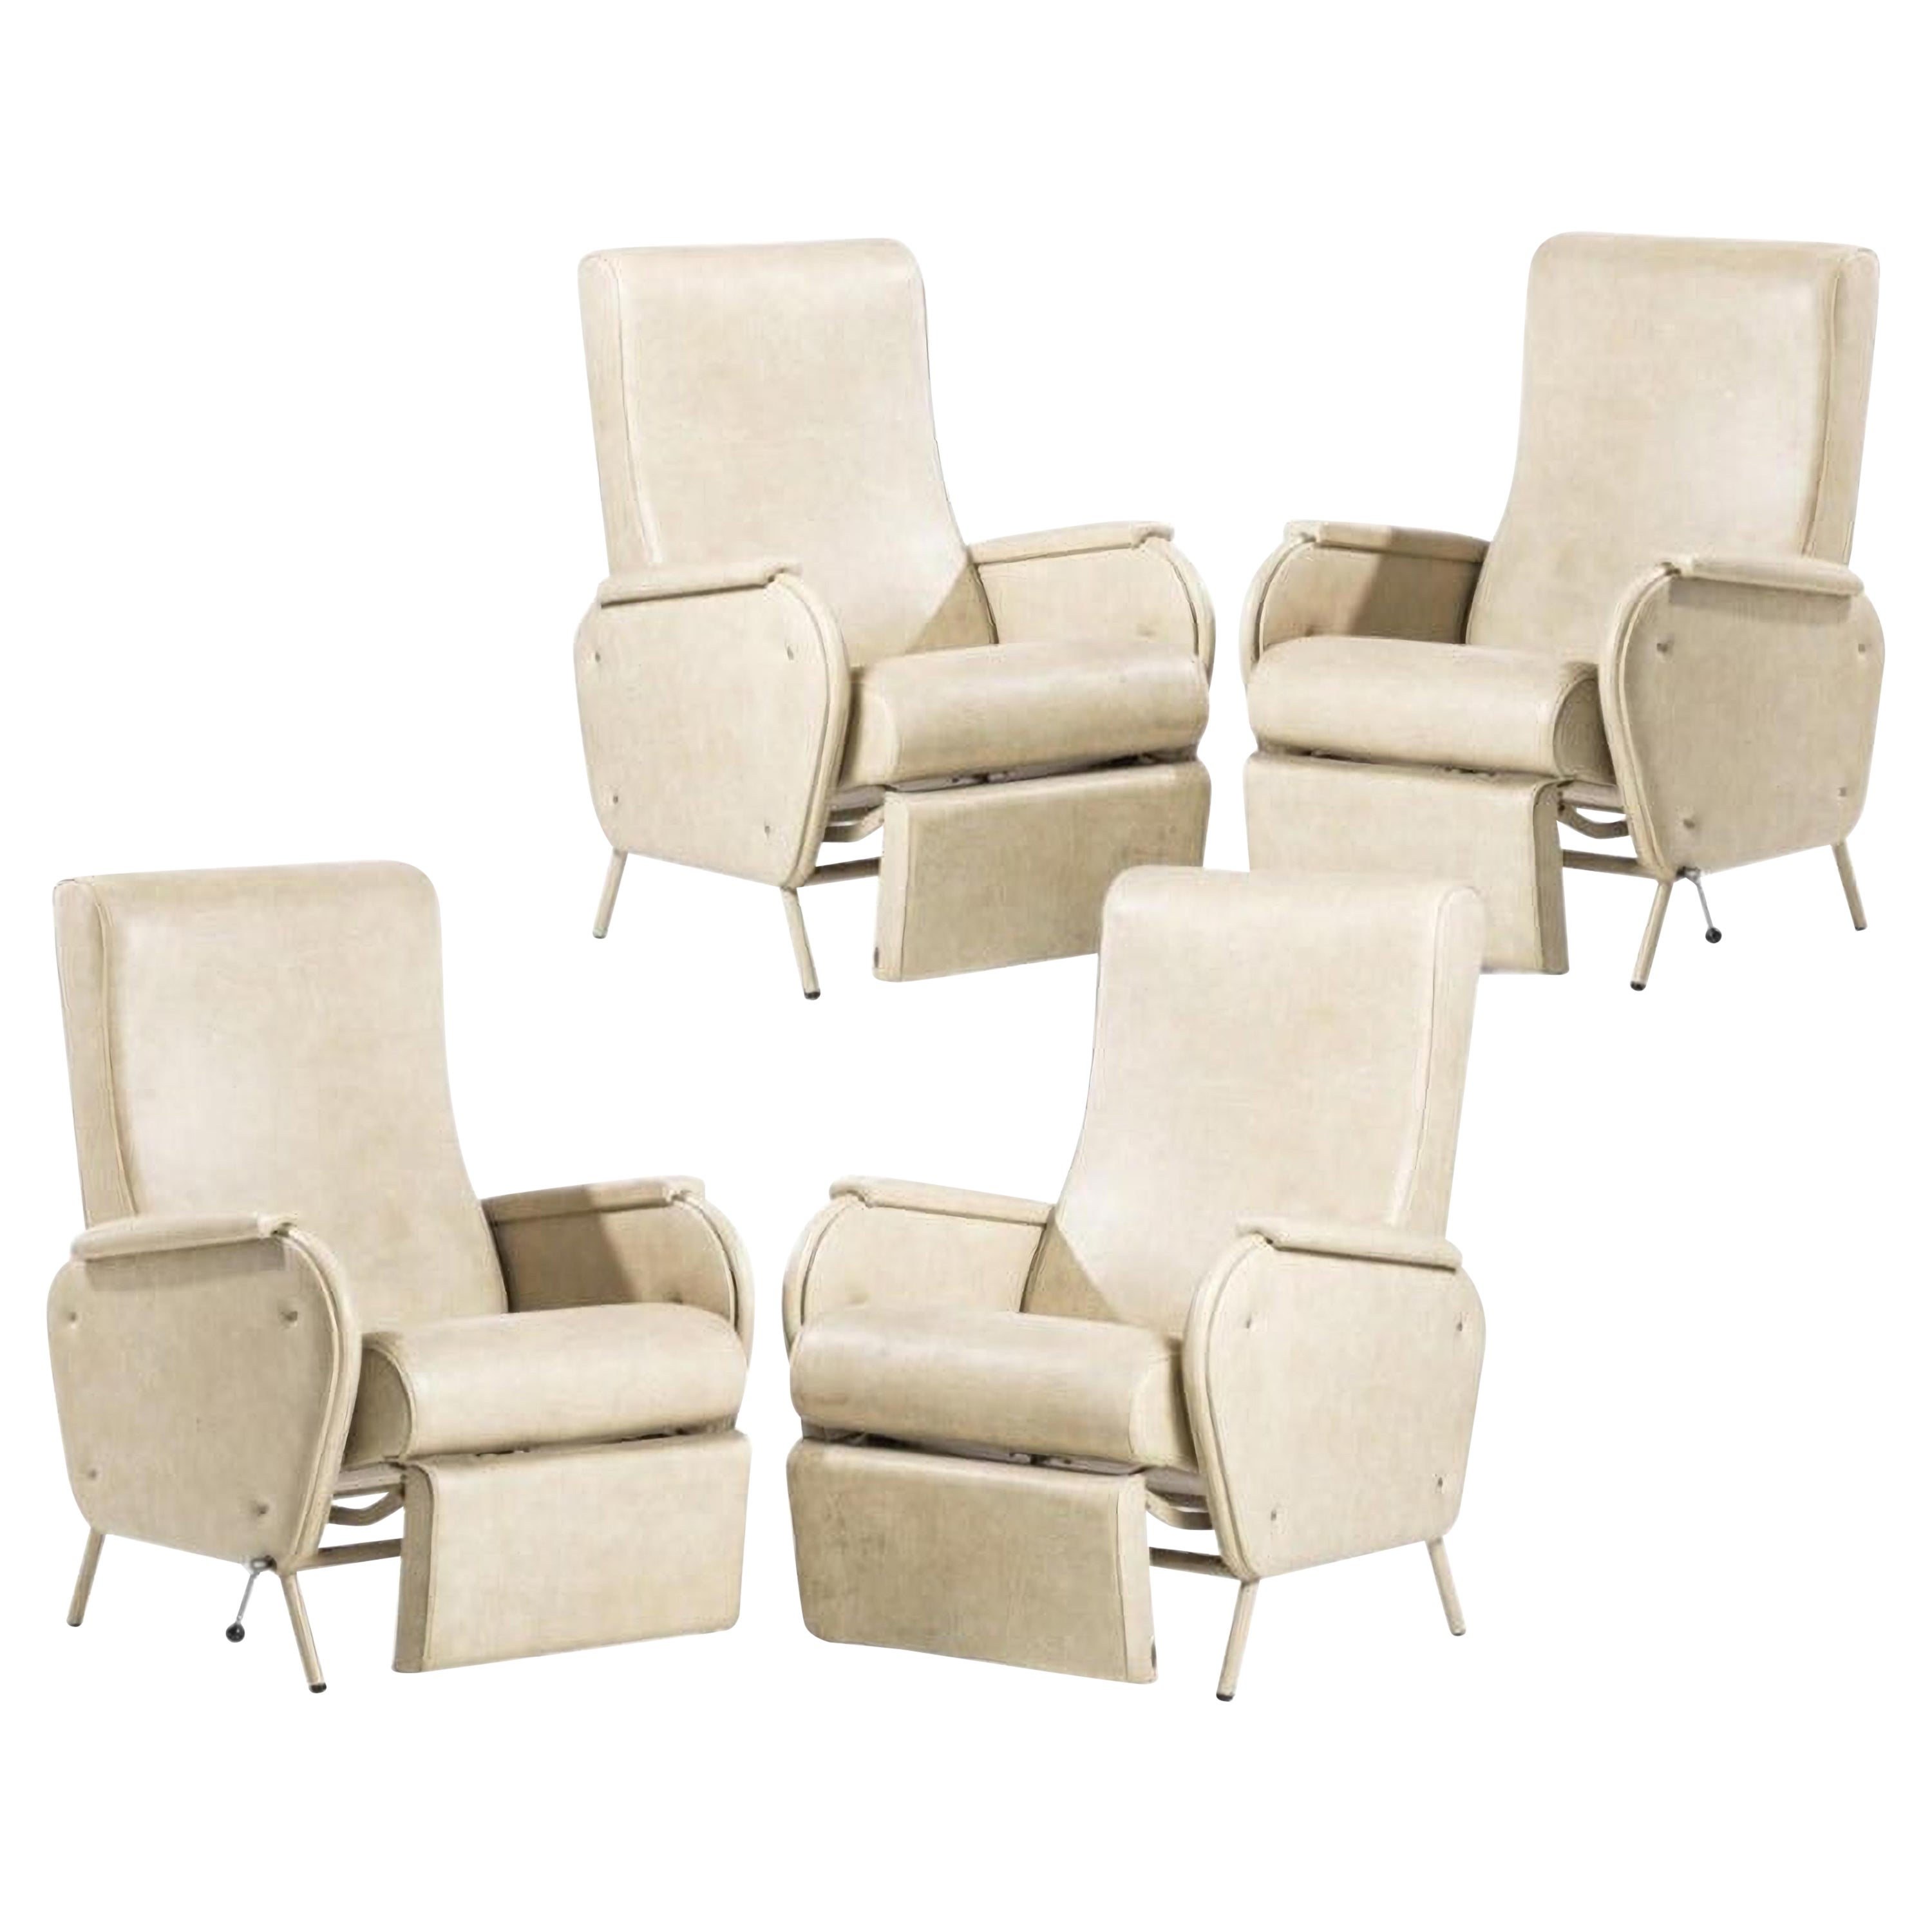 French Set of Four Art Deco Chairs, Early 20th Century